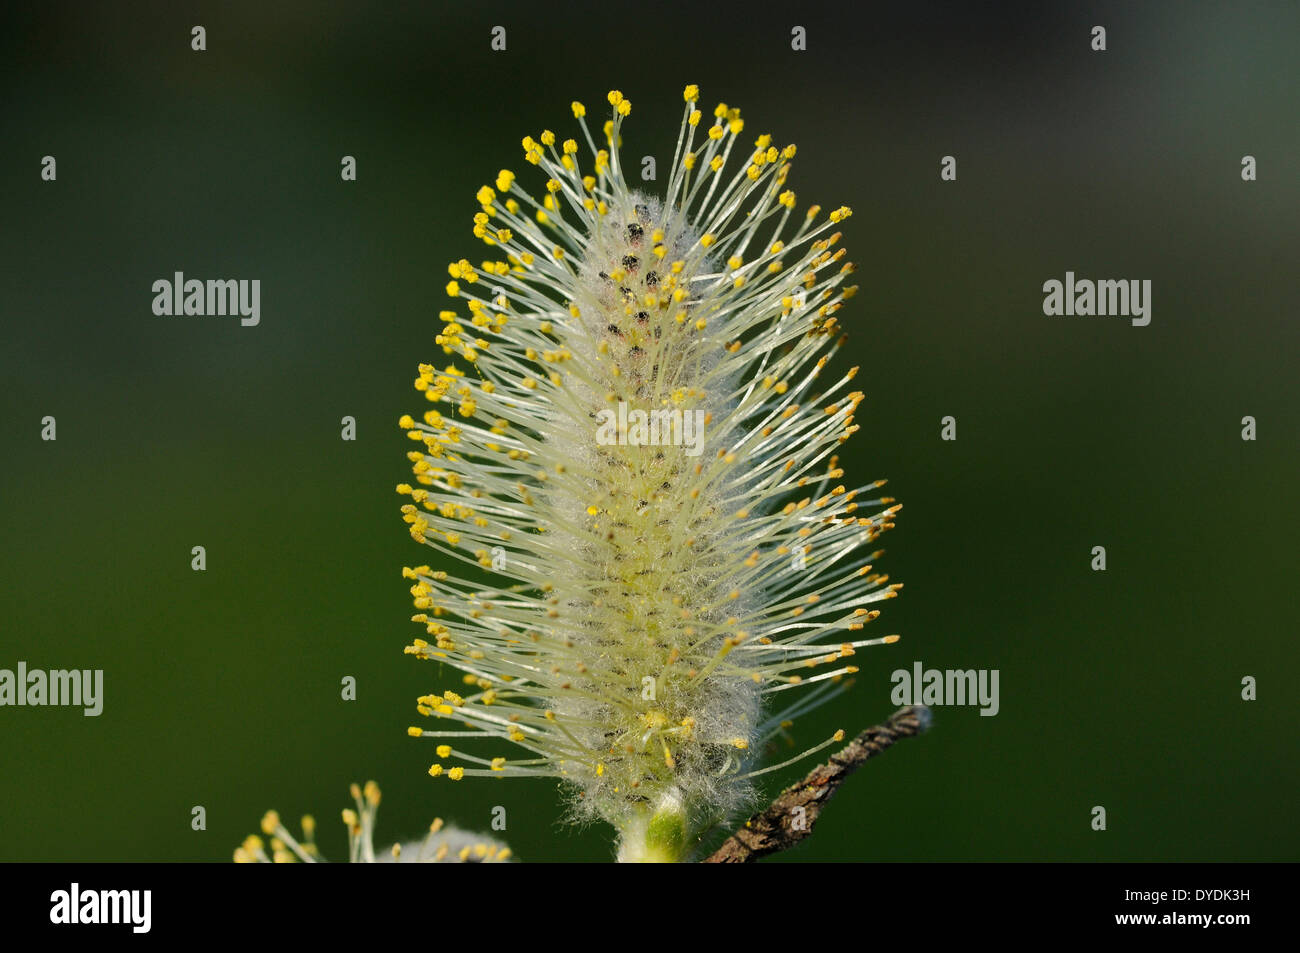 Grey Willow, Salix cinerea, Salicaceae, Willow, willow catkin, blossoms ...